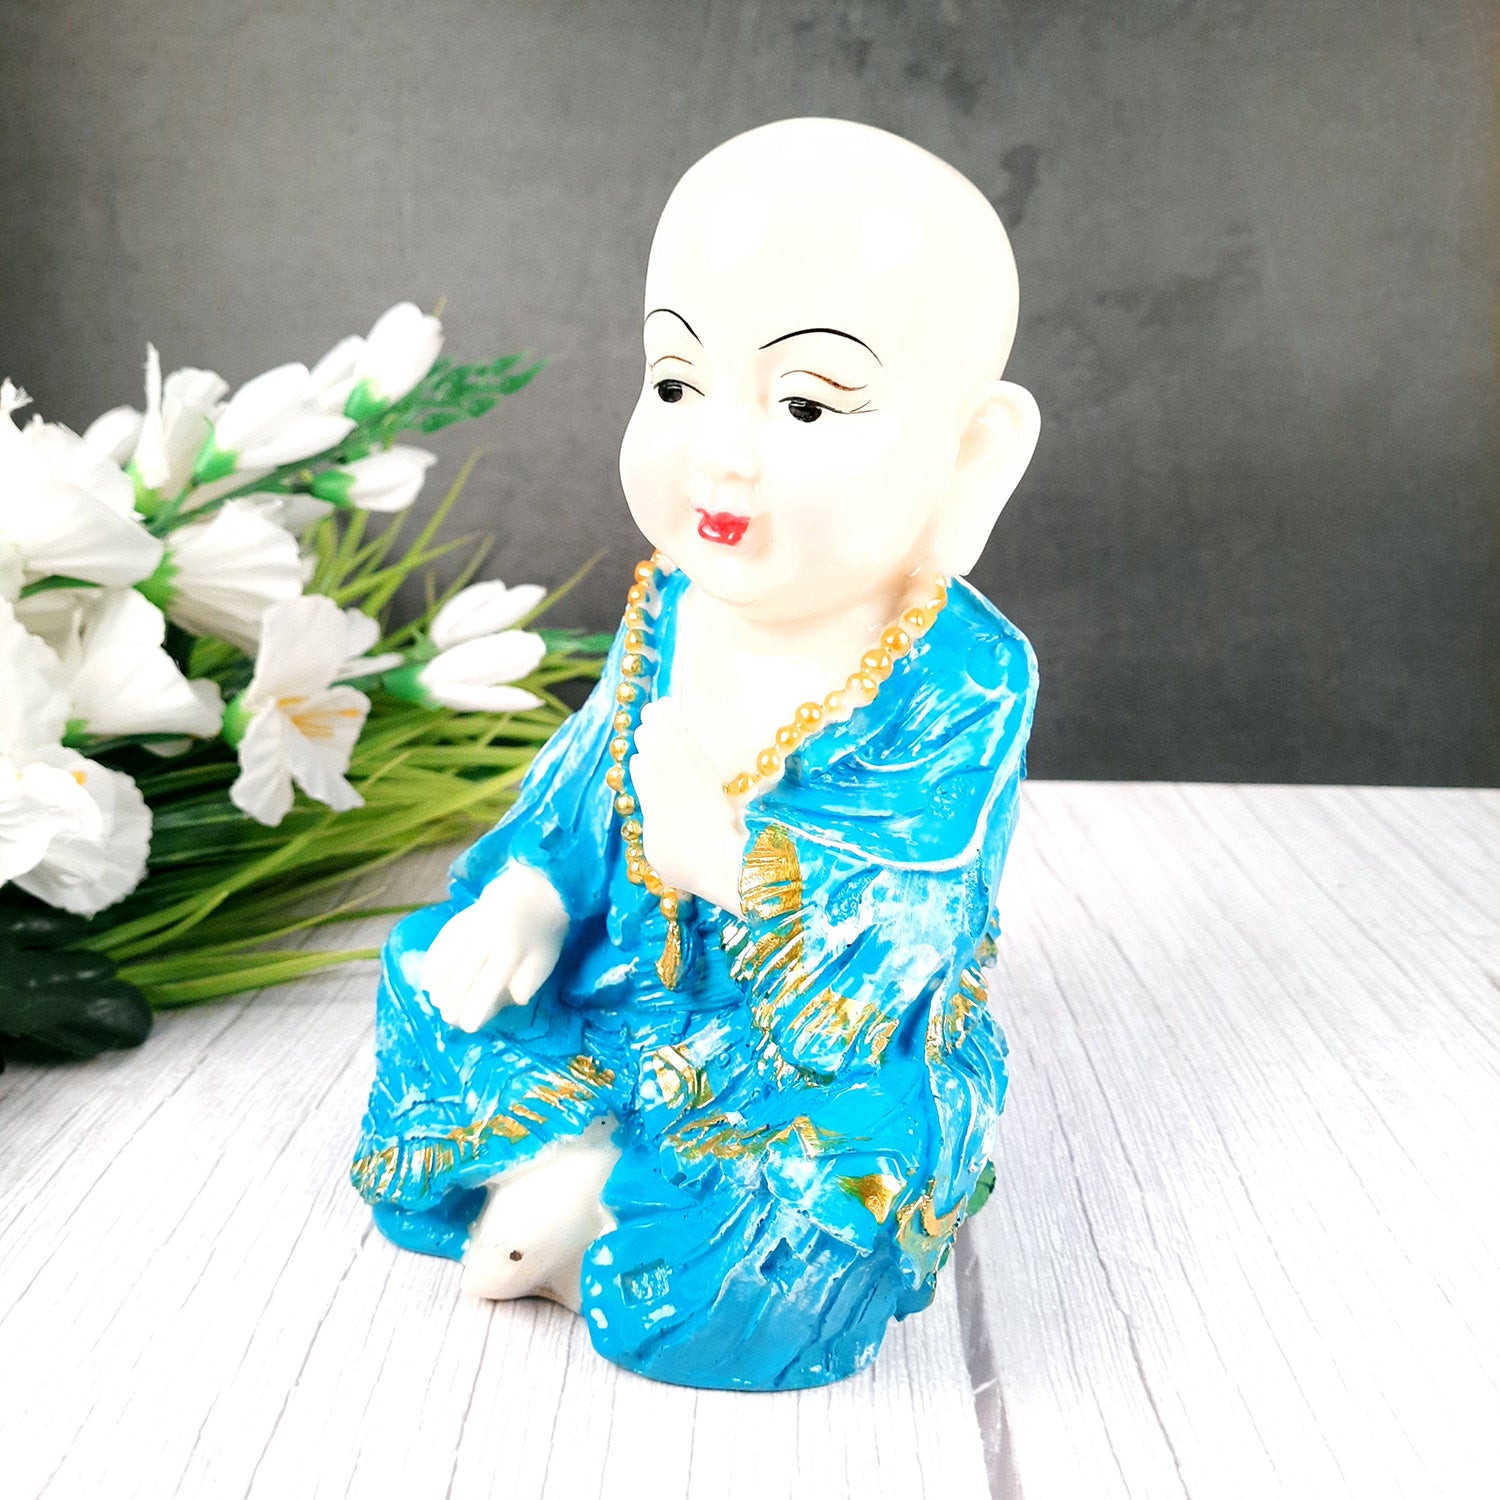 Baby Monk Showpiece Set | Feng Shui Decor - For Good Luck, Home, Table, Office Decor & Gift - 9 Inch (Pack of 3) - apkamart